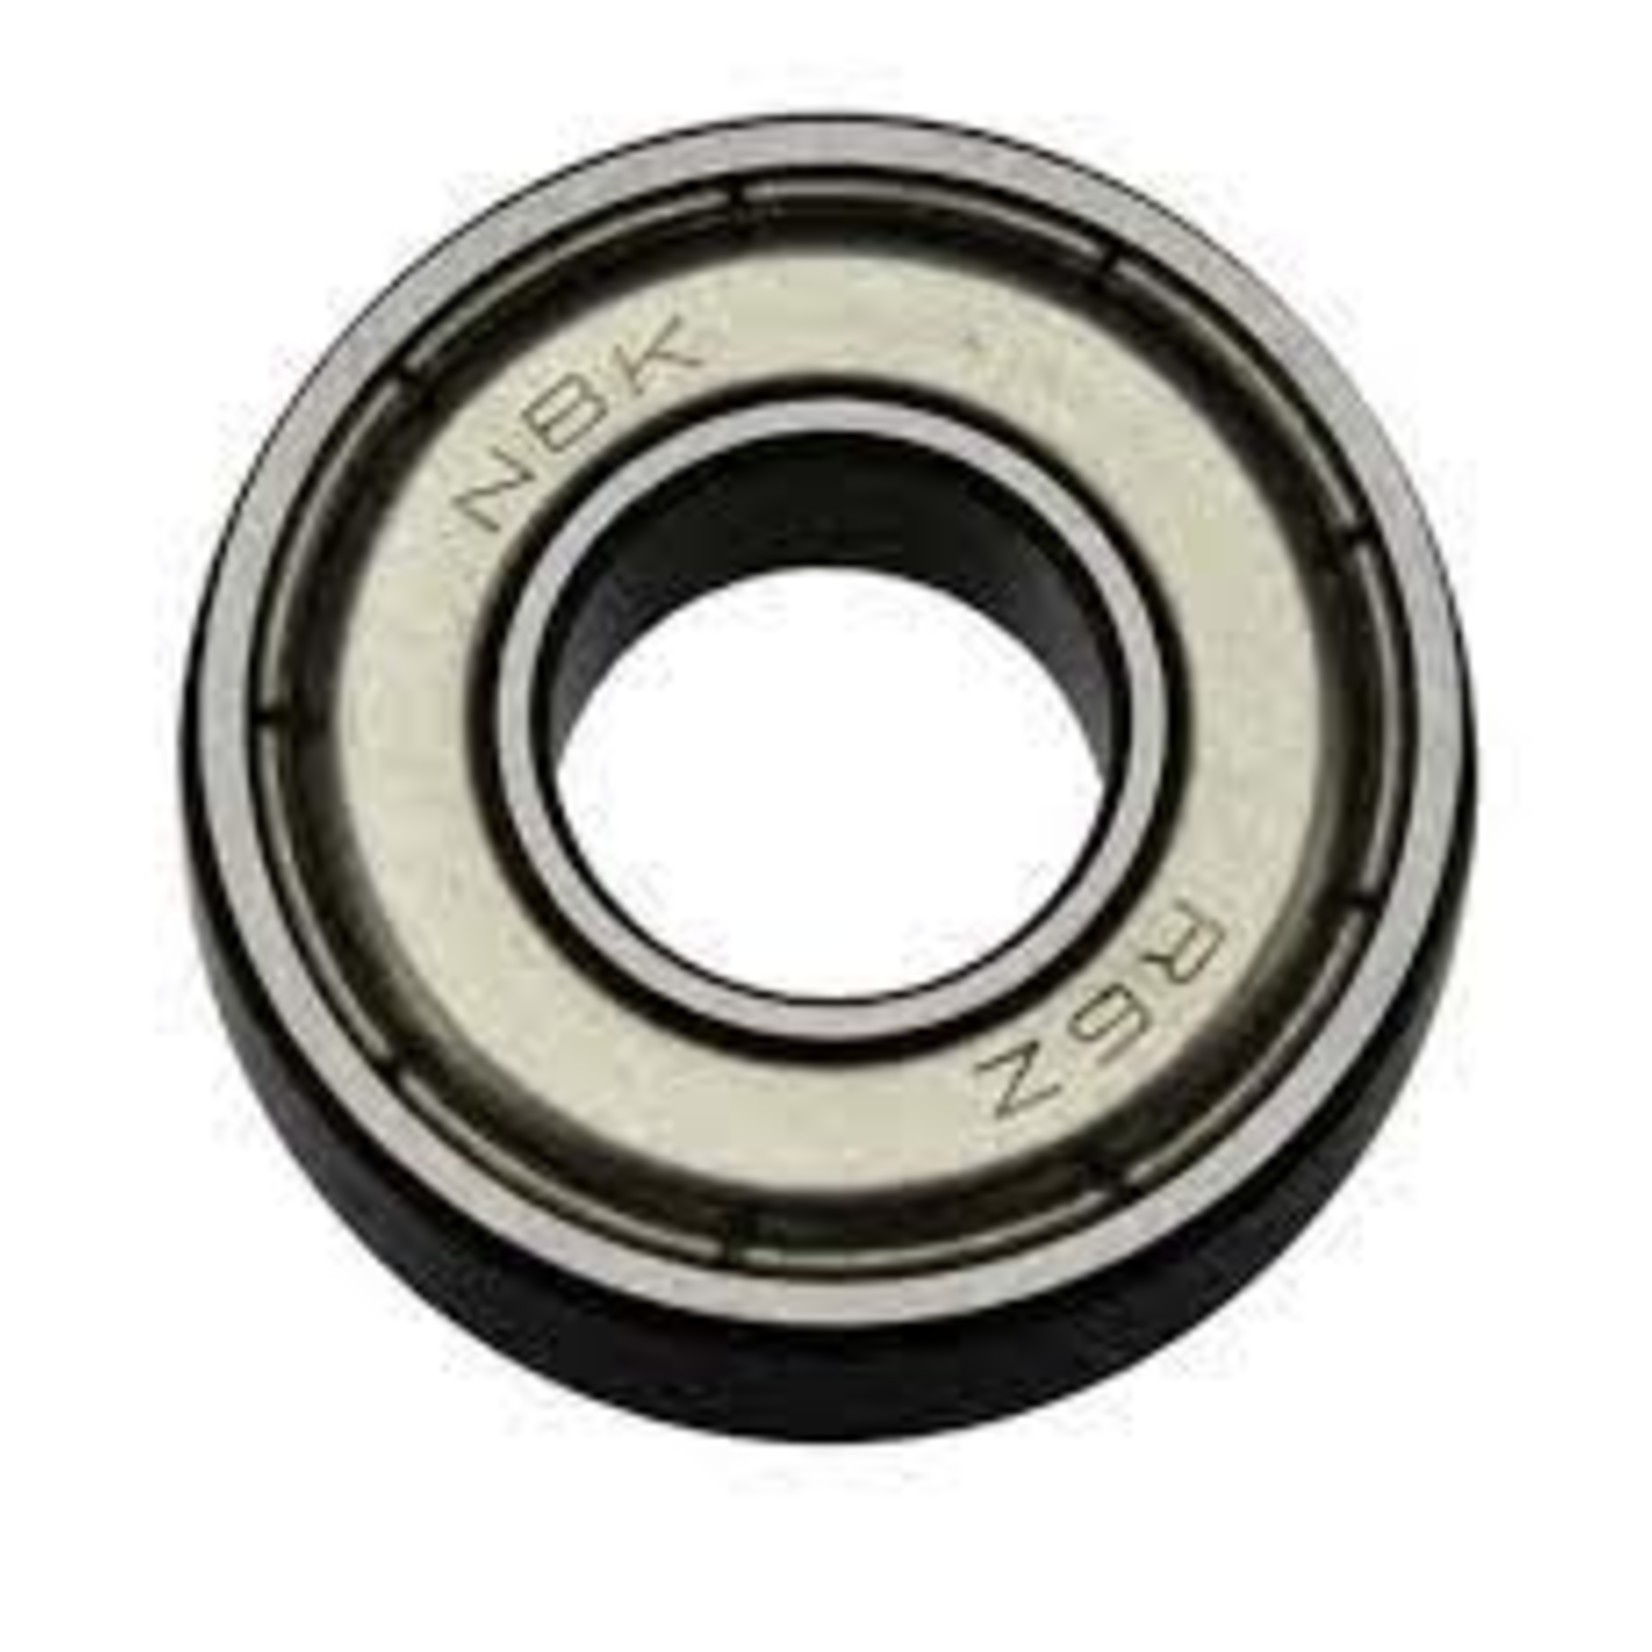 DW DW 7/8inch OD PRECISION BEARING FOR SQUARE